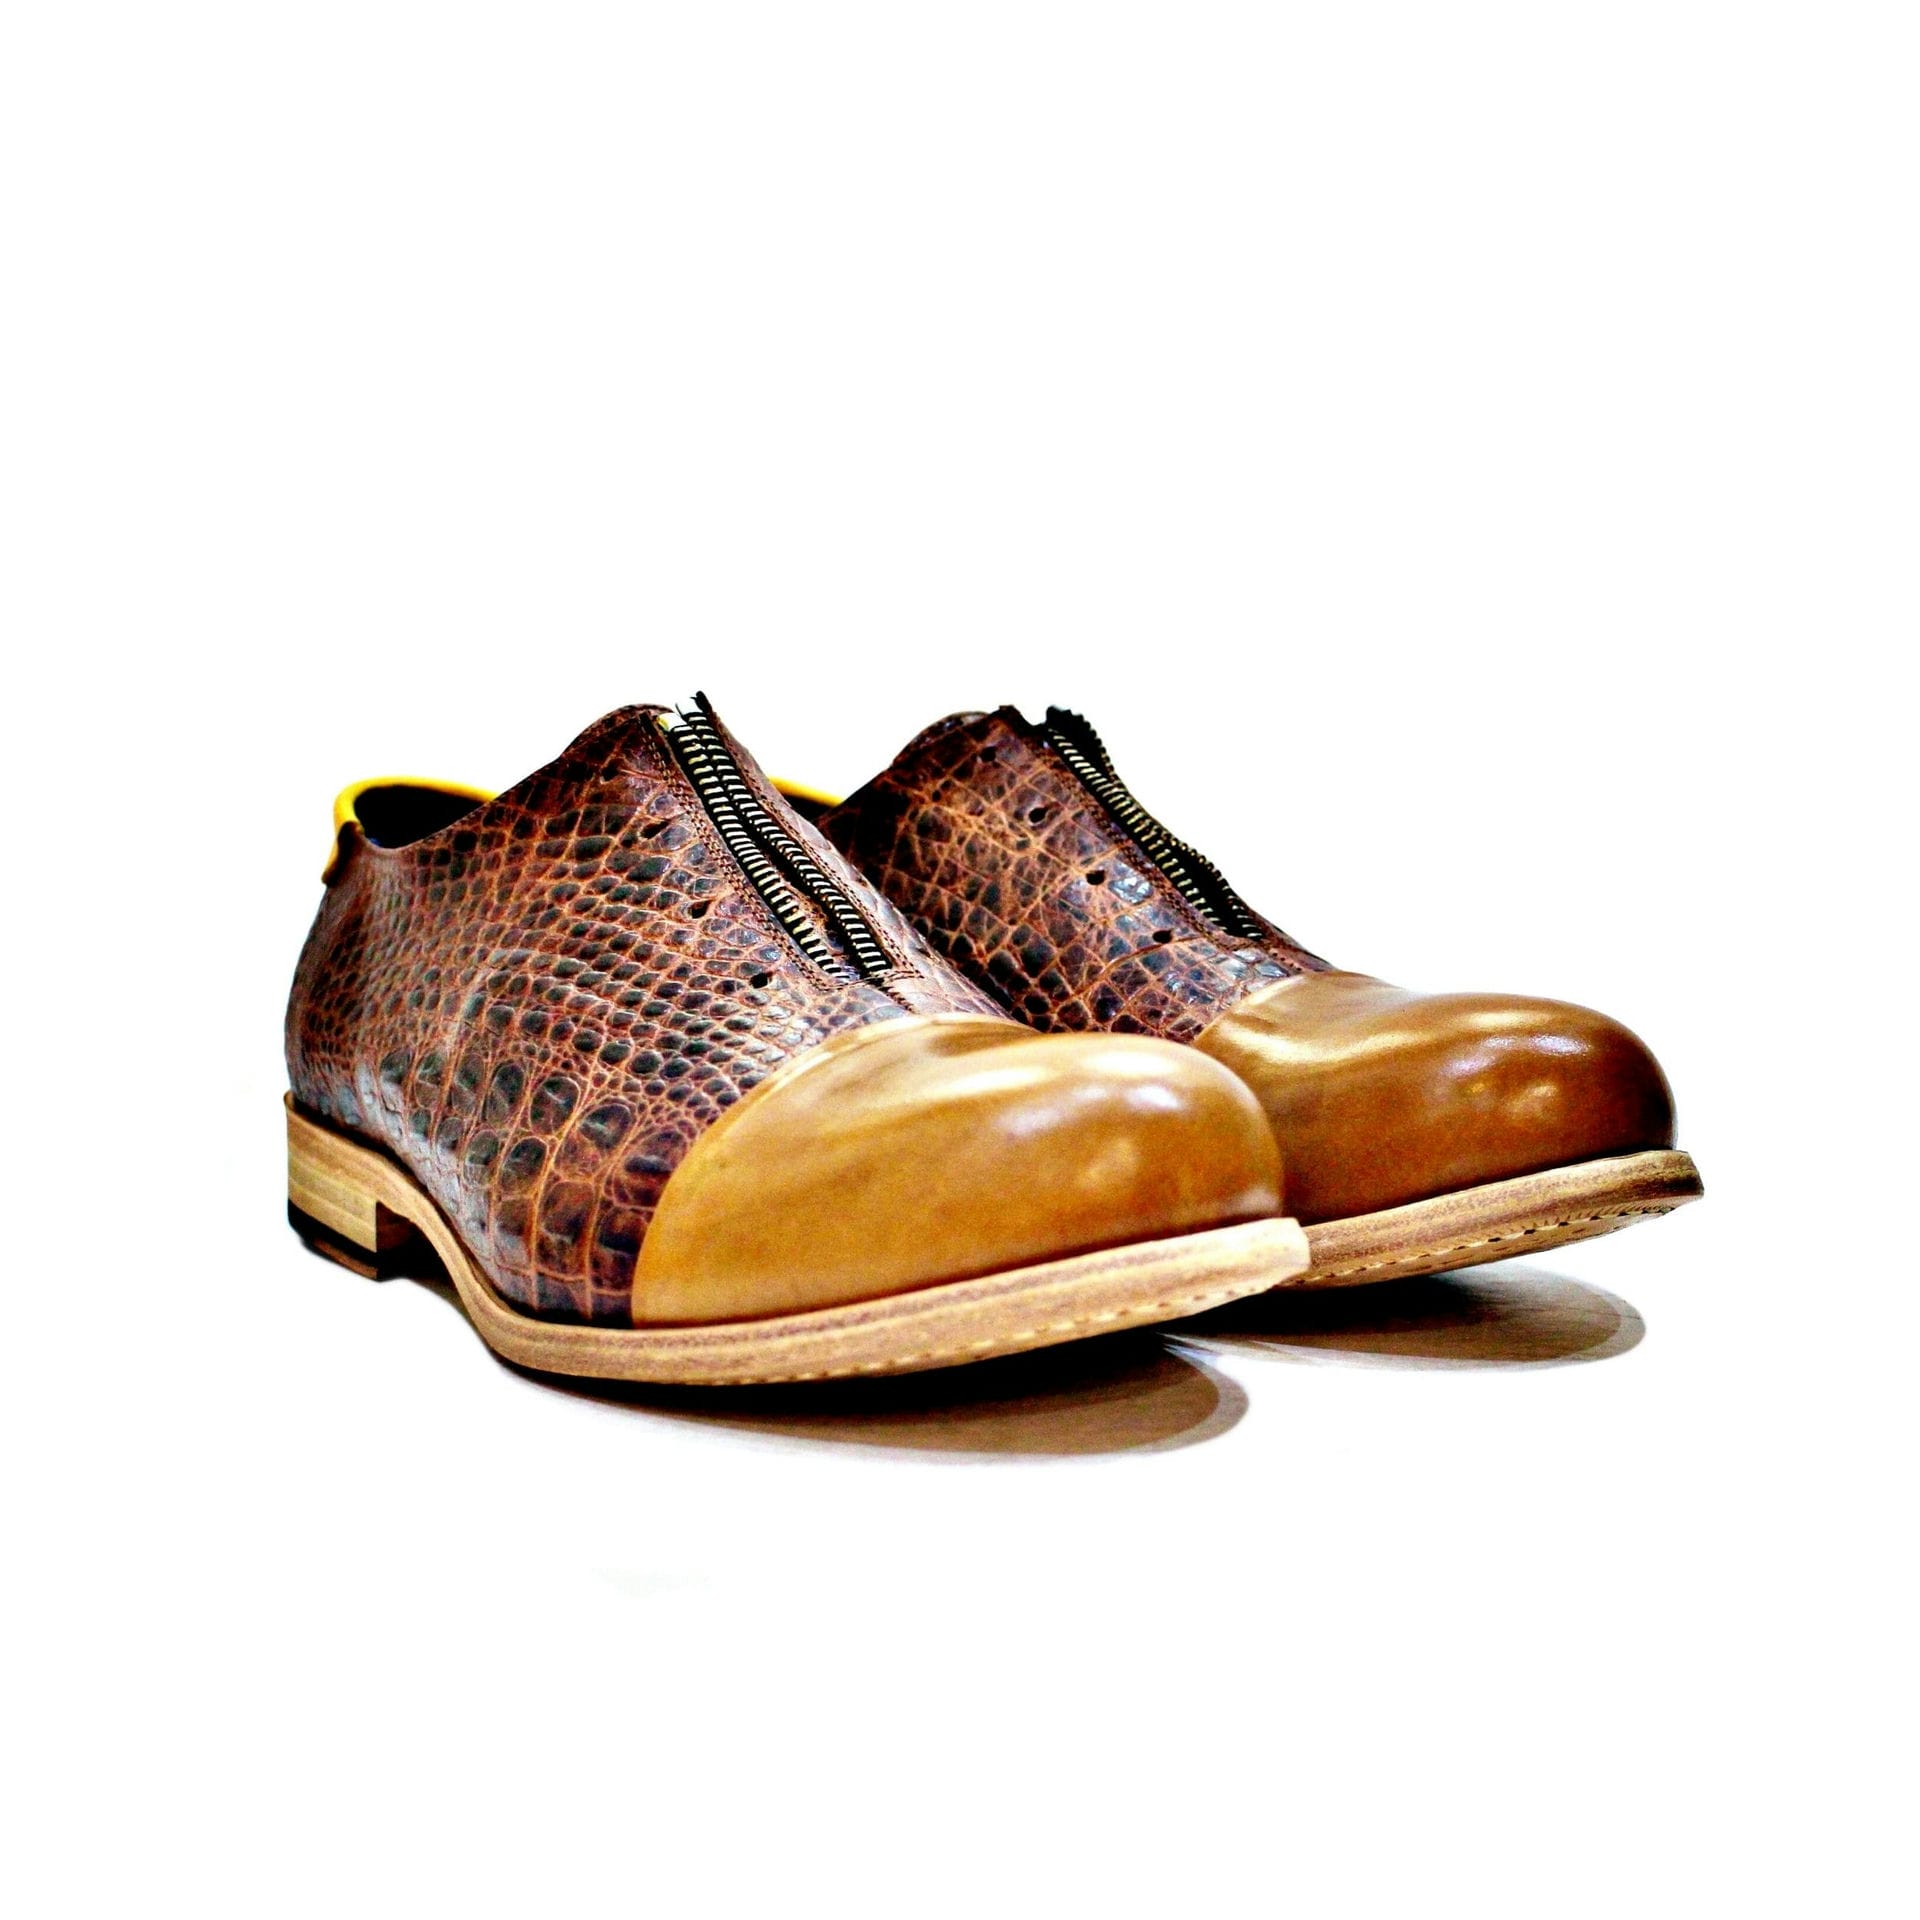 Siena shoe is all composed of leather. Icon Model made to MAO in Portugal. “Walk with Pintta”